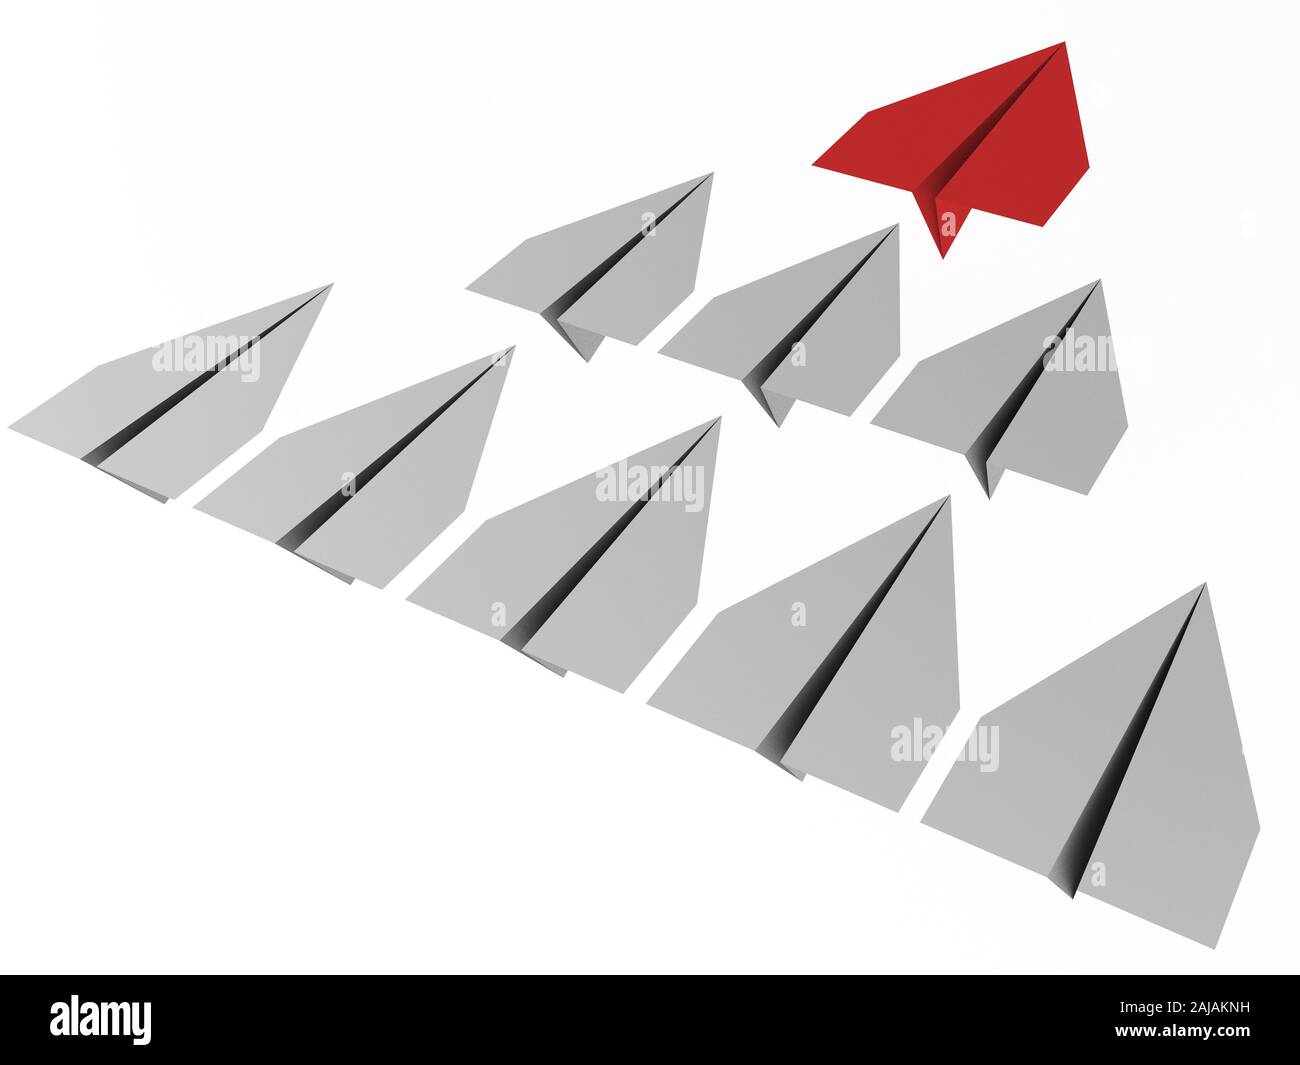 Leadership concept. One red leader plane leads other grey planes forward. 3d render Stock Photo